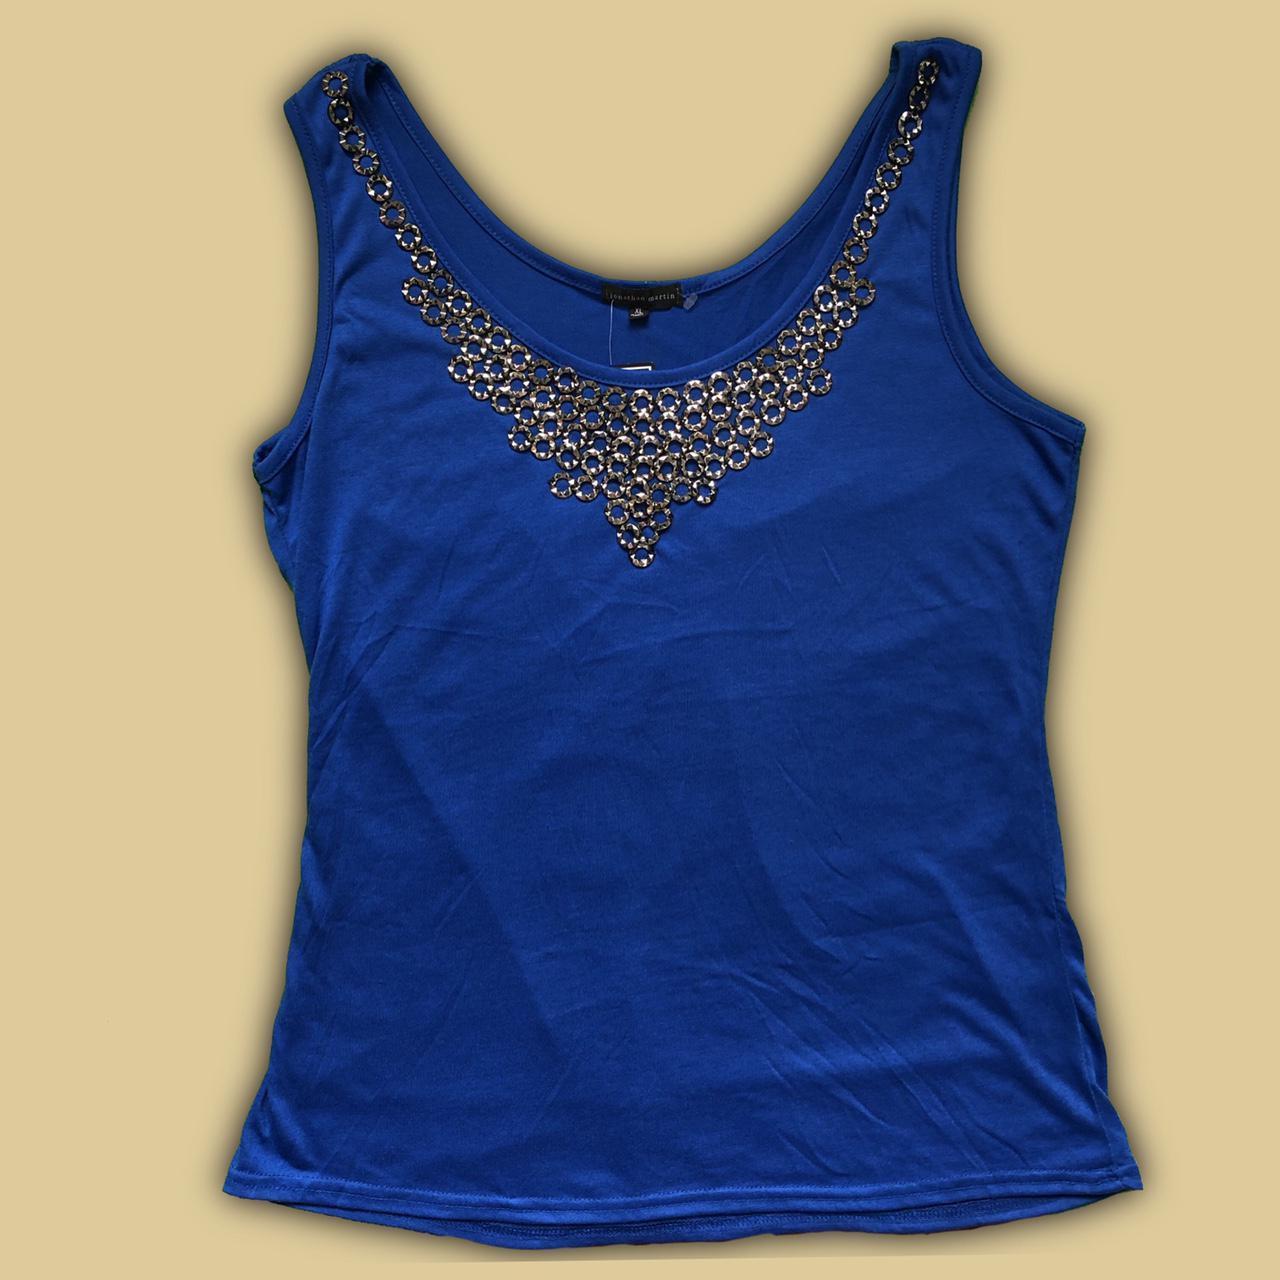 Product Image 1 - Blue tank top blouse with